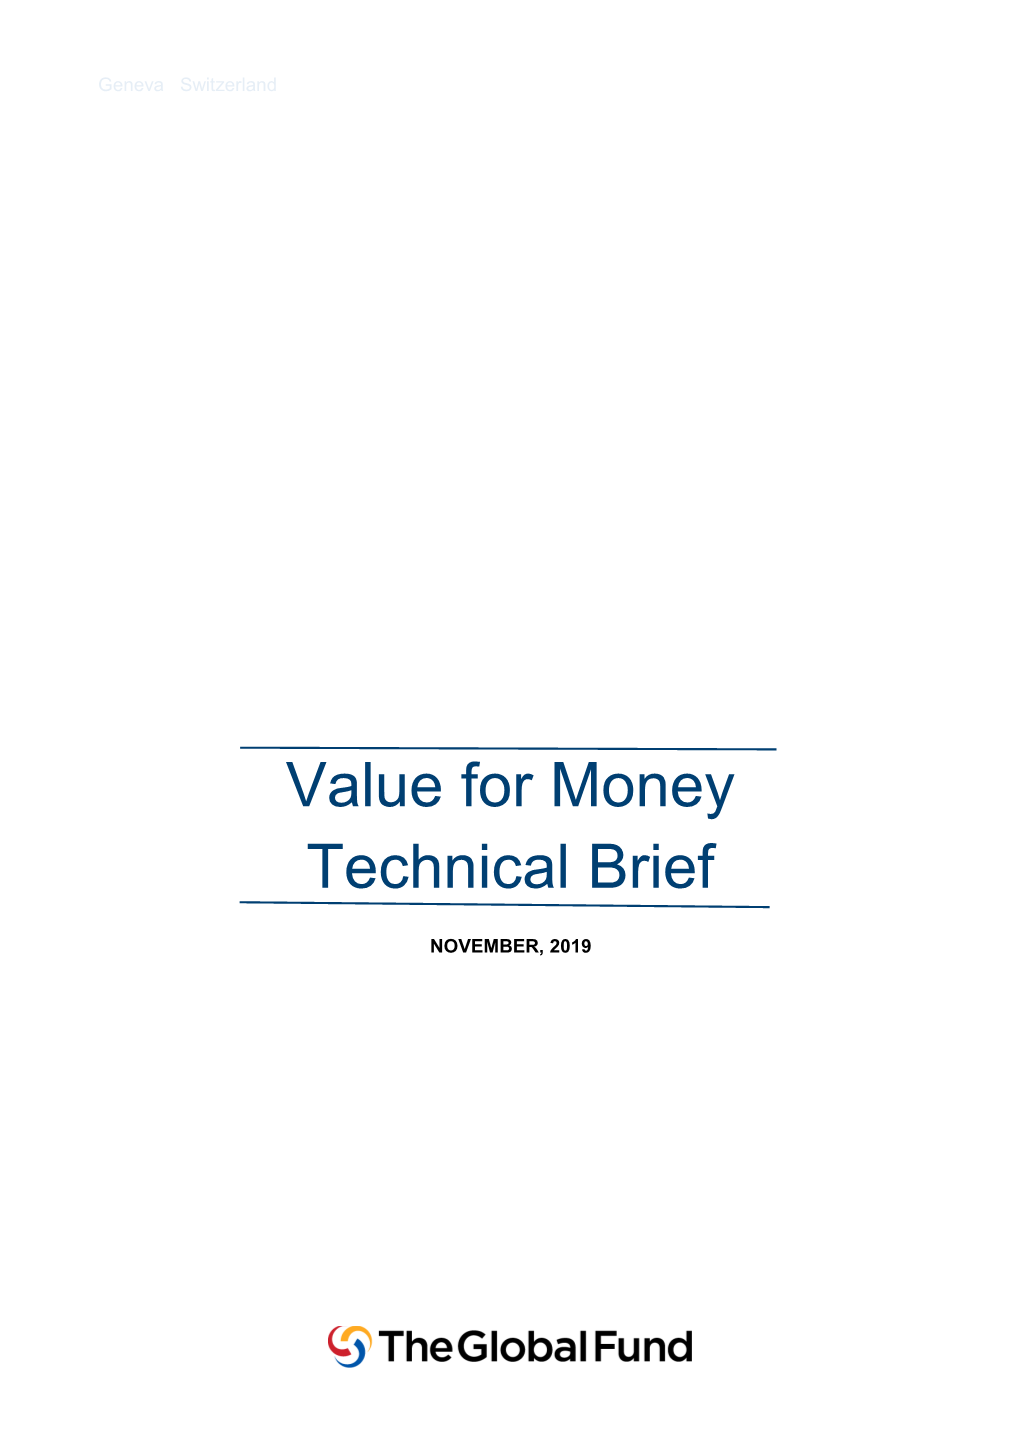 Value for Money Technical Brief